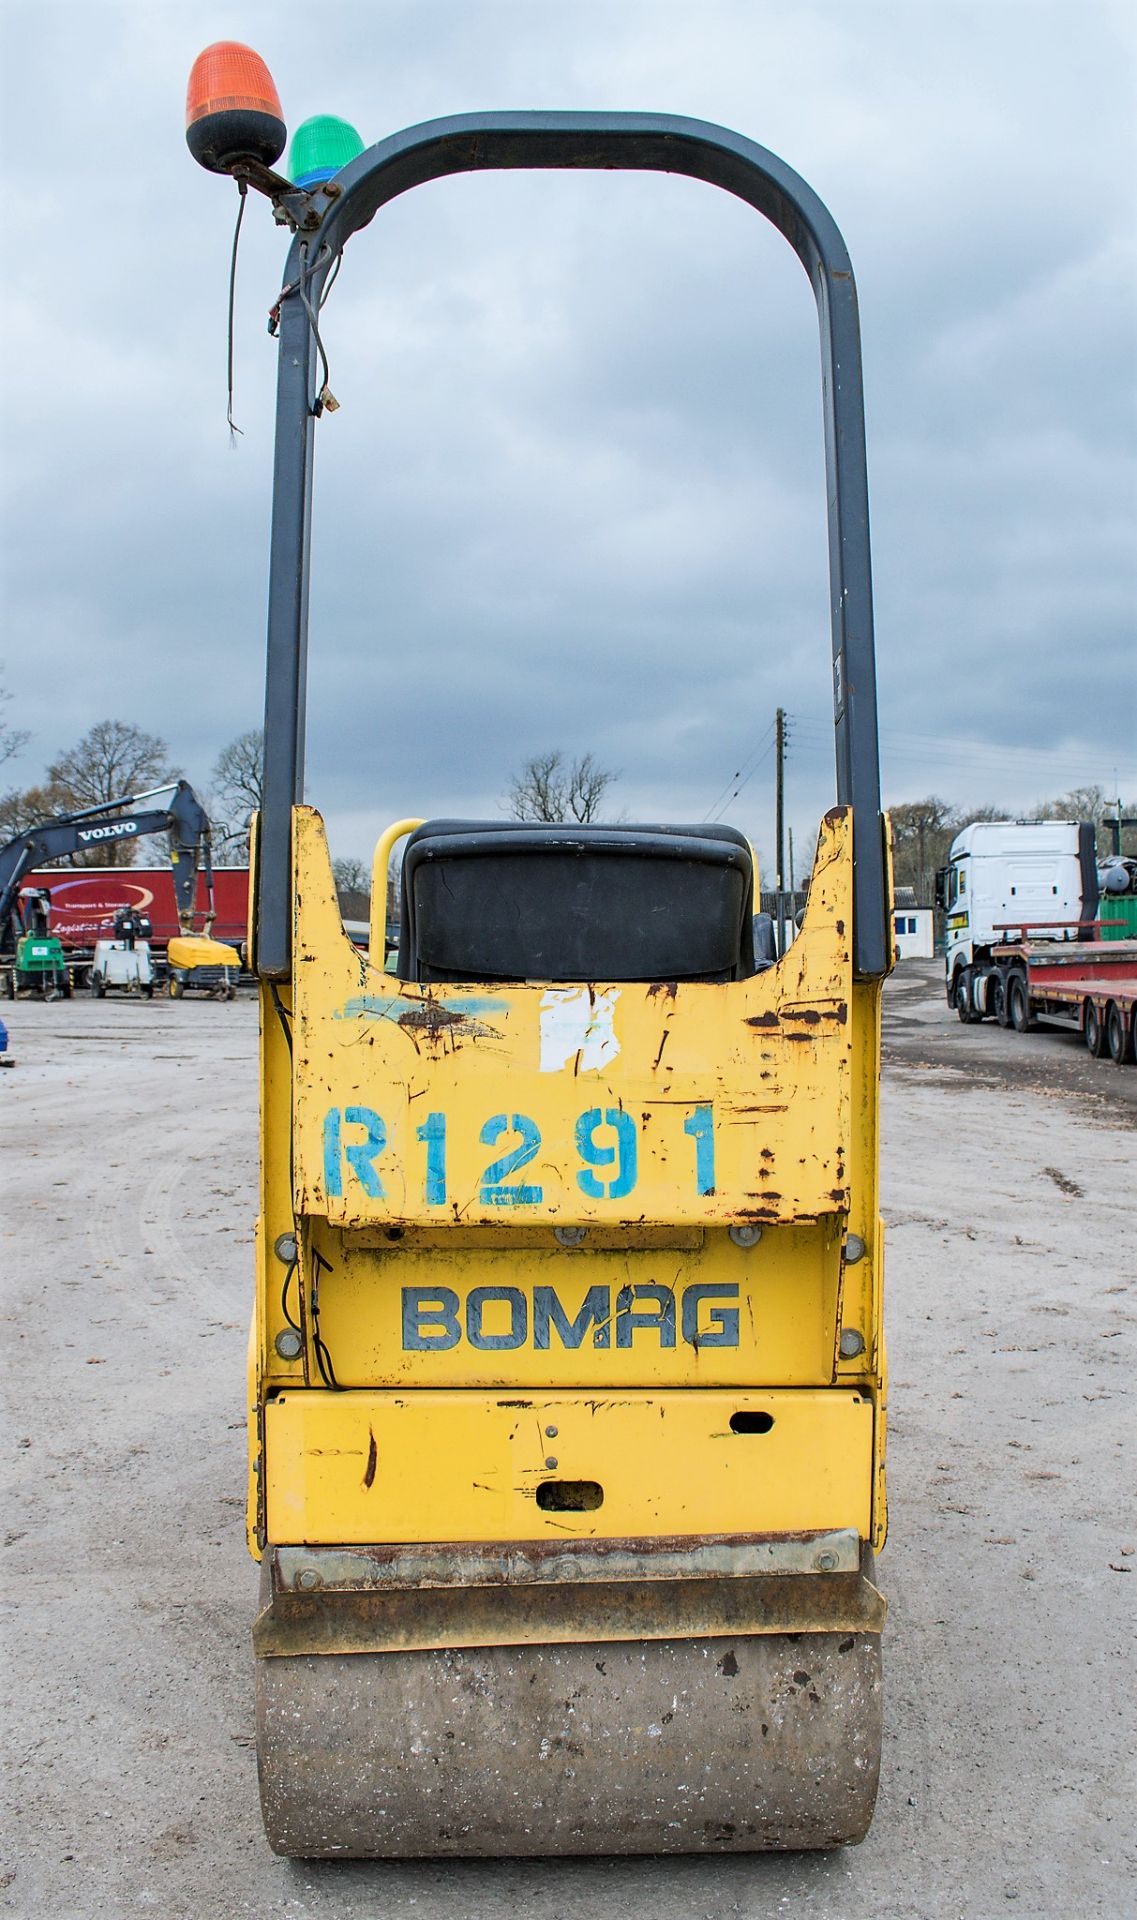 Bomag BW80 AD-2 double drum ride on roller Year: 2006 S/N: 426837 Recorded Hours: 770 R1291 - Image 6 of 13